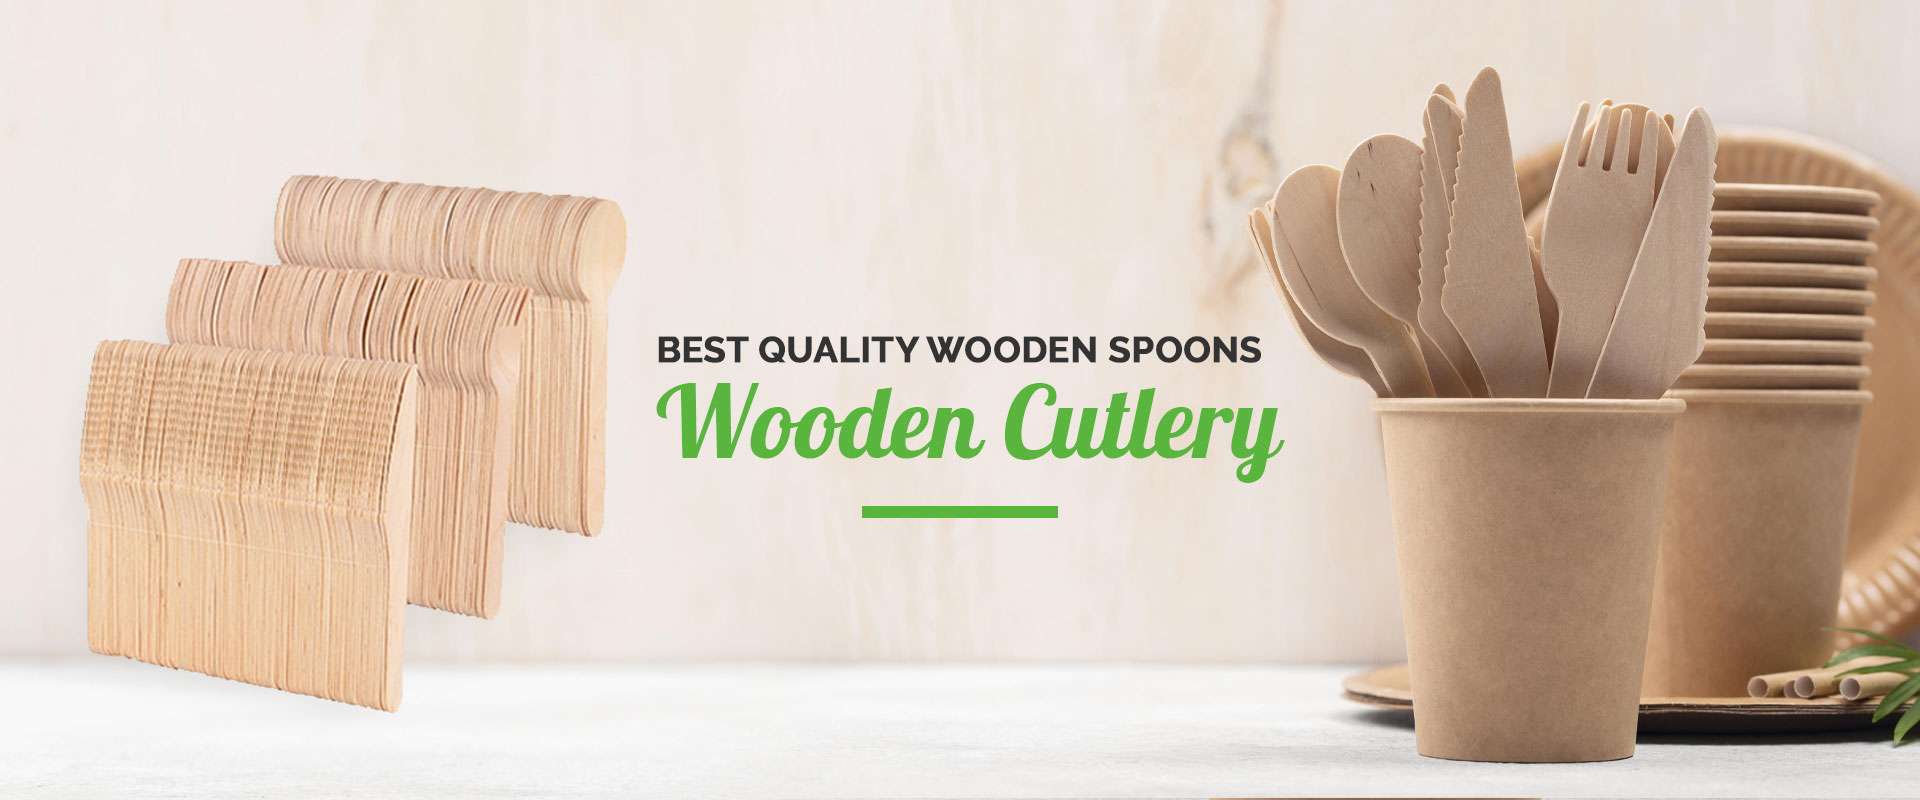  Wooden Cutlery Manufacturers in Indore